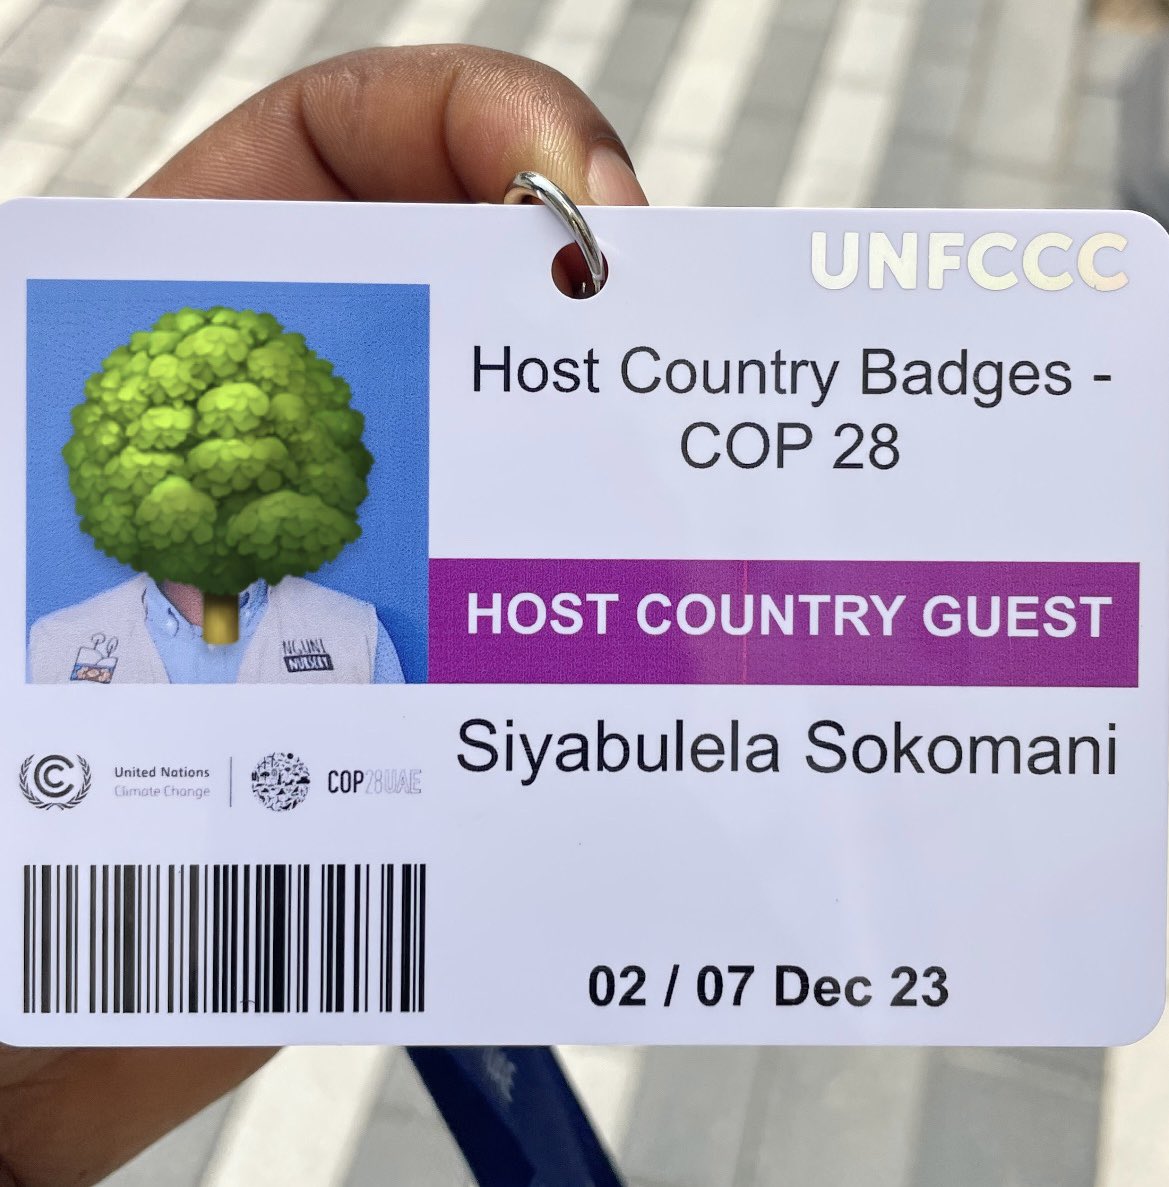 Excited to represent @NguniNursery at #COP28 for the next few days, showcasing our climate change initiatives! 🌍 Looking forward to connecting with fellow attendees. Let’s meet and exchange ideas on making a positive impact! #ClimateAction #Sustainability #generationrestoration